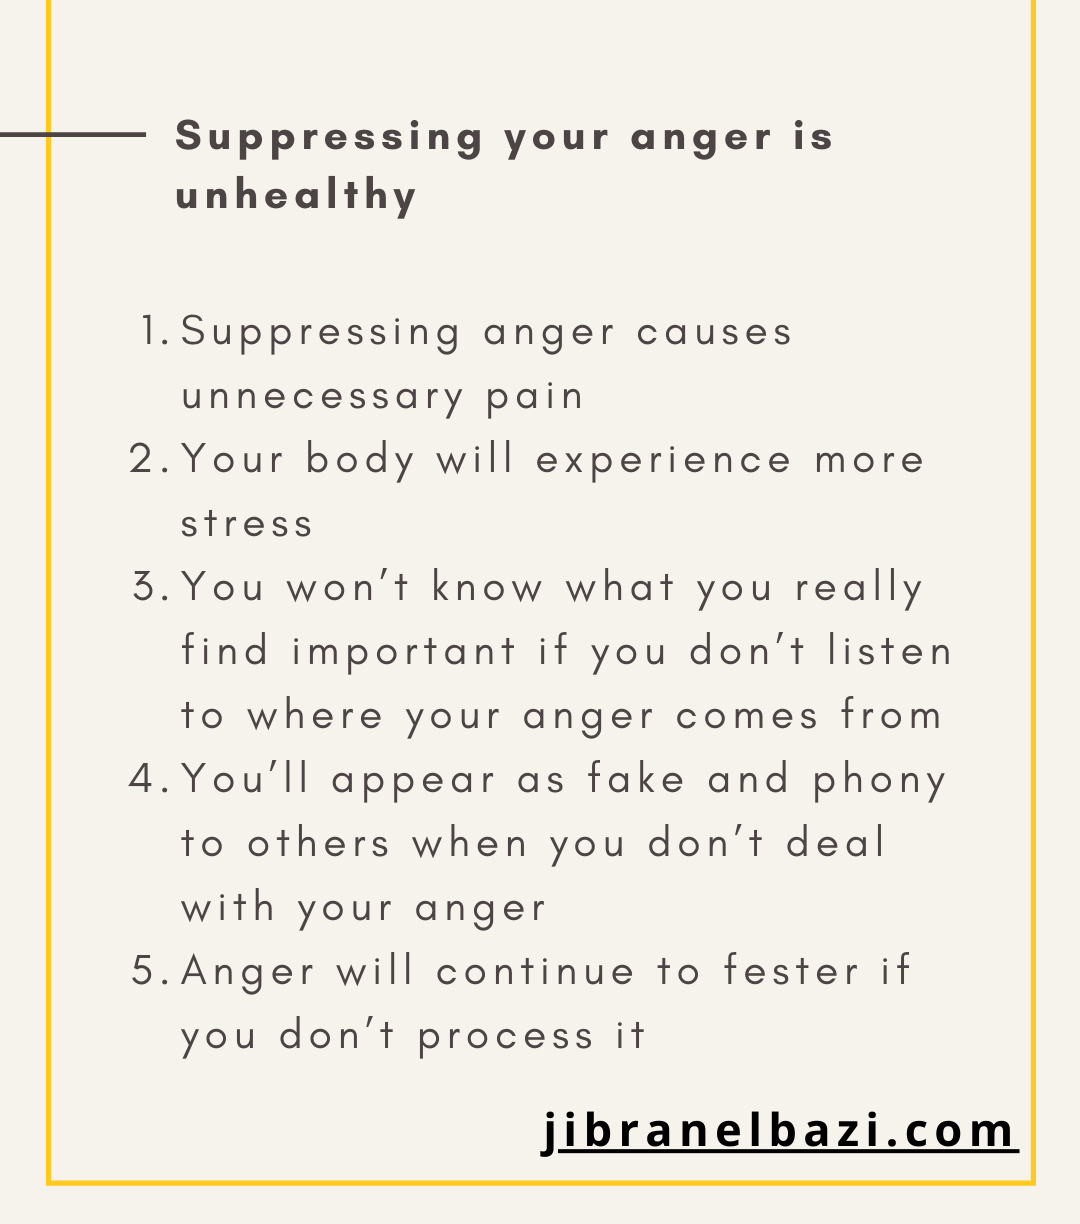 list with reasons suppressing your anger is unhealthy